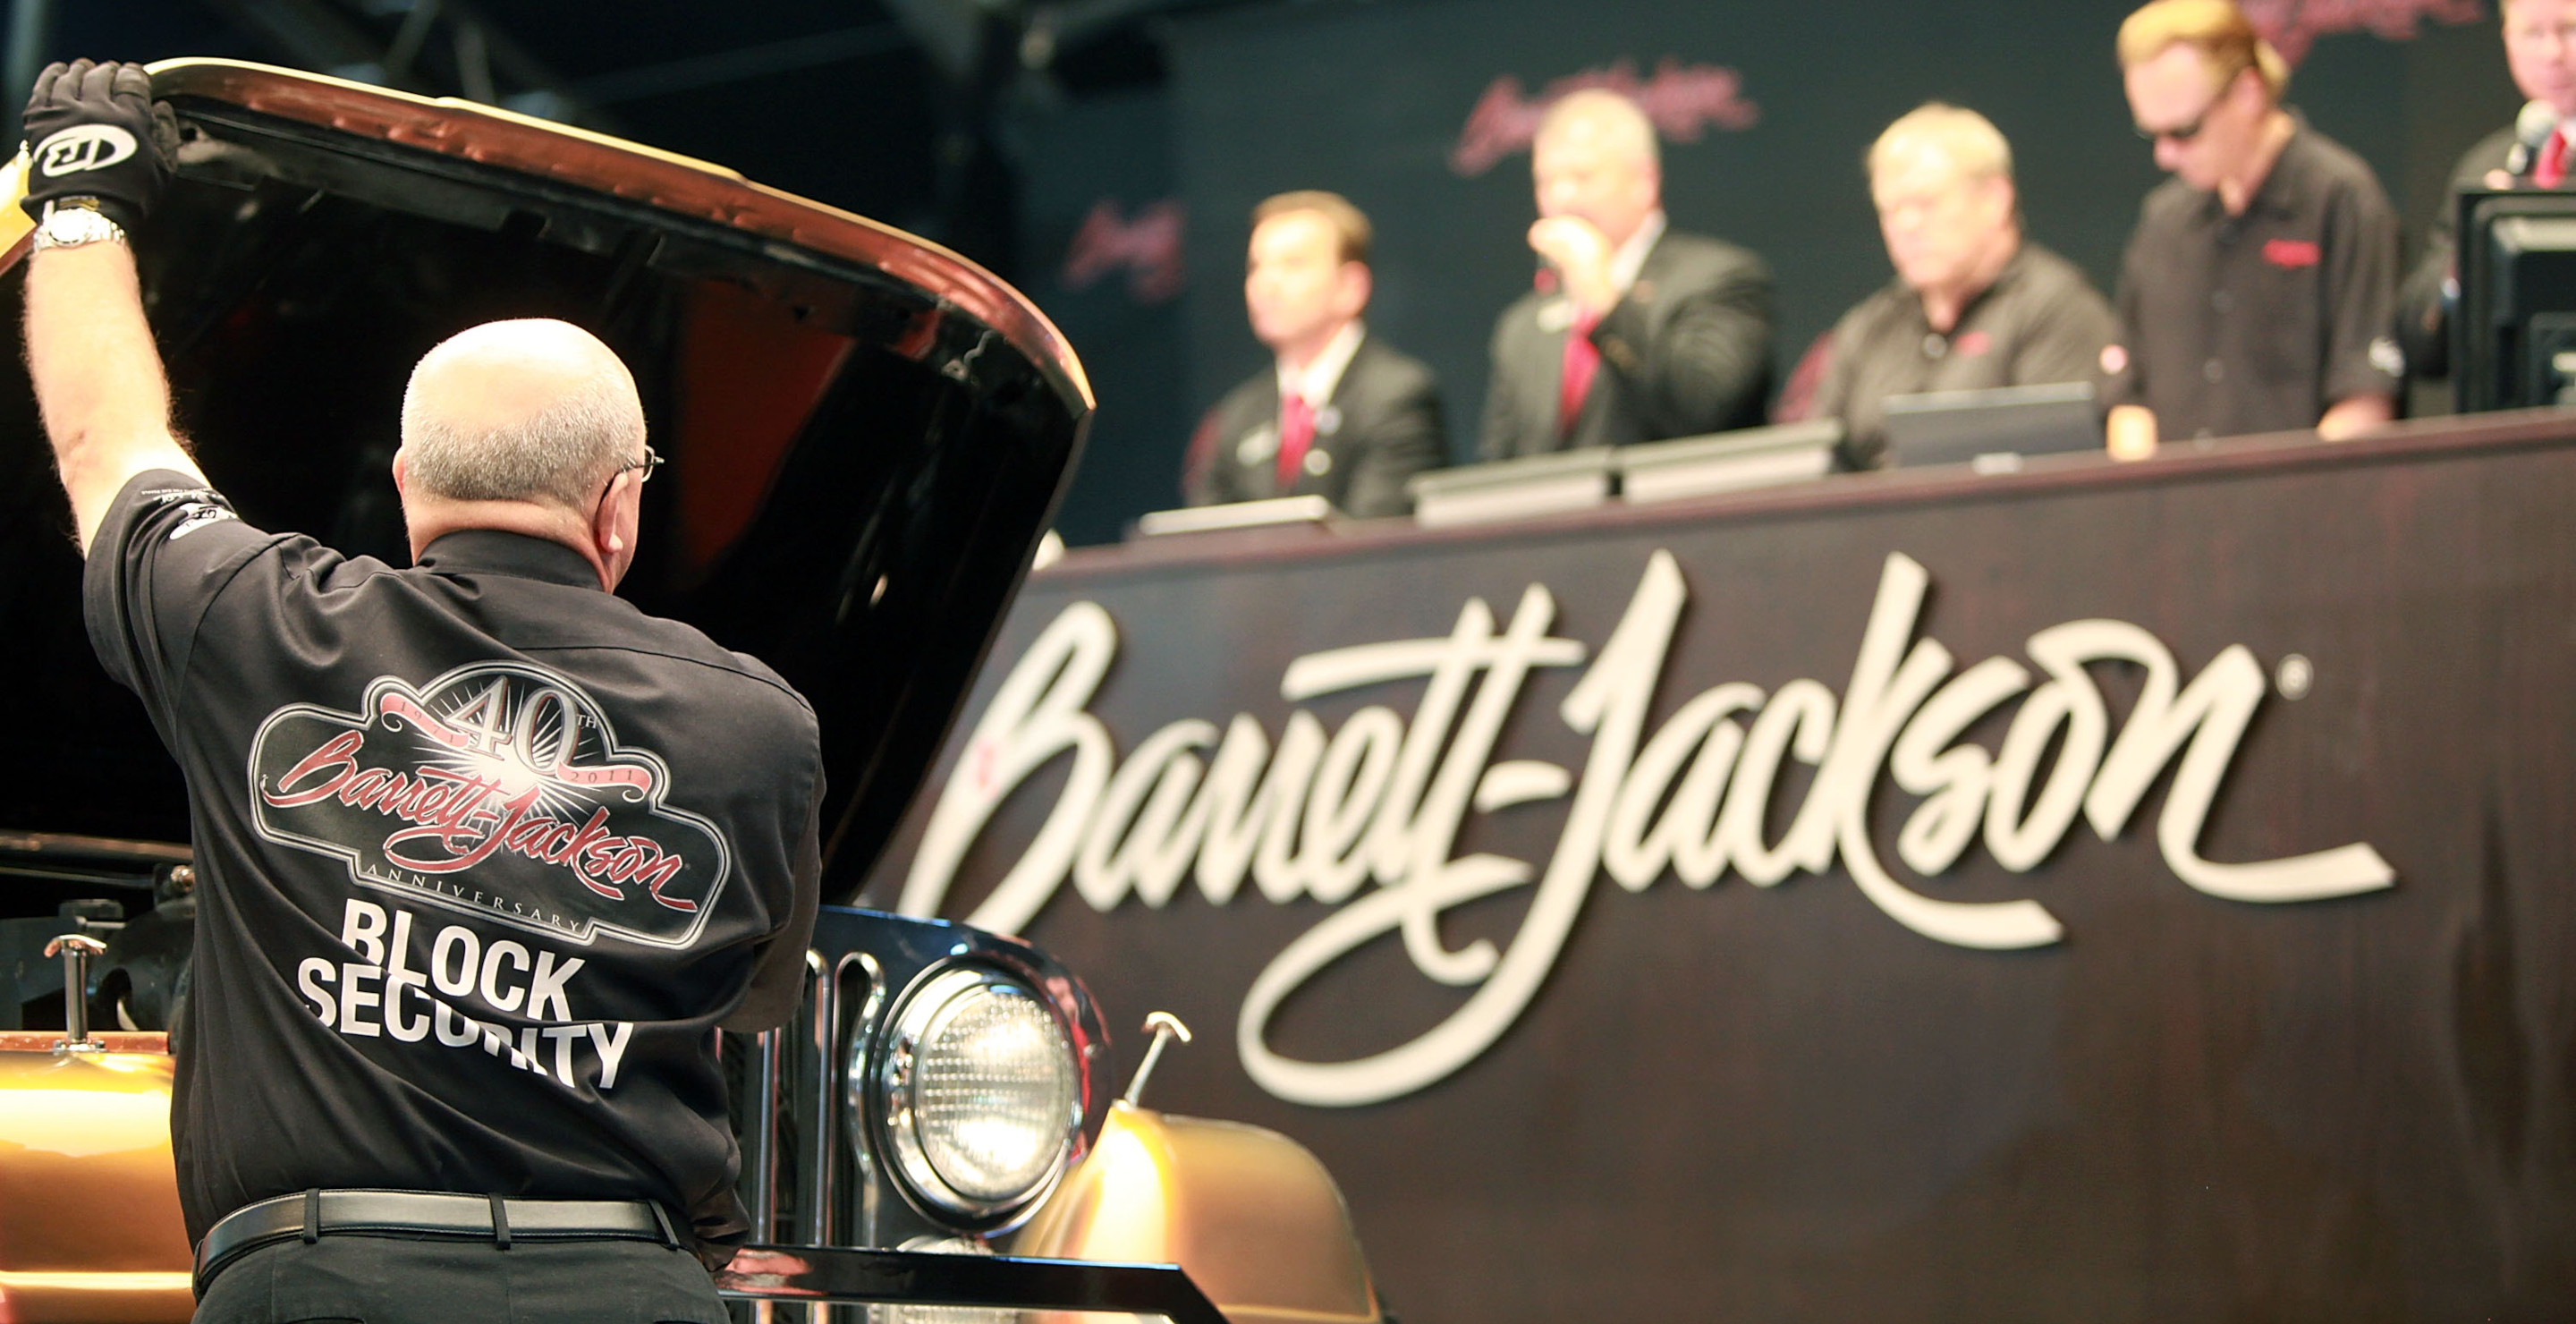   
																These Luxury Cars Just Sold For Over a Million Dollars At The Barrett-Jackson Auto Show 
															 